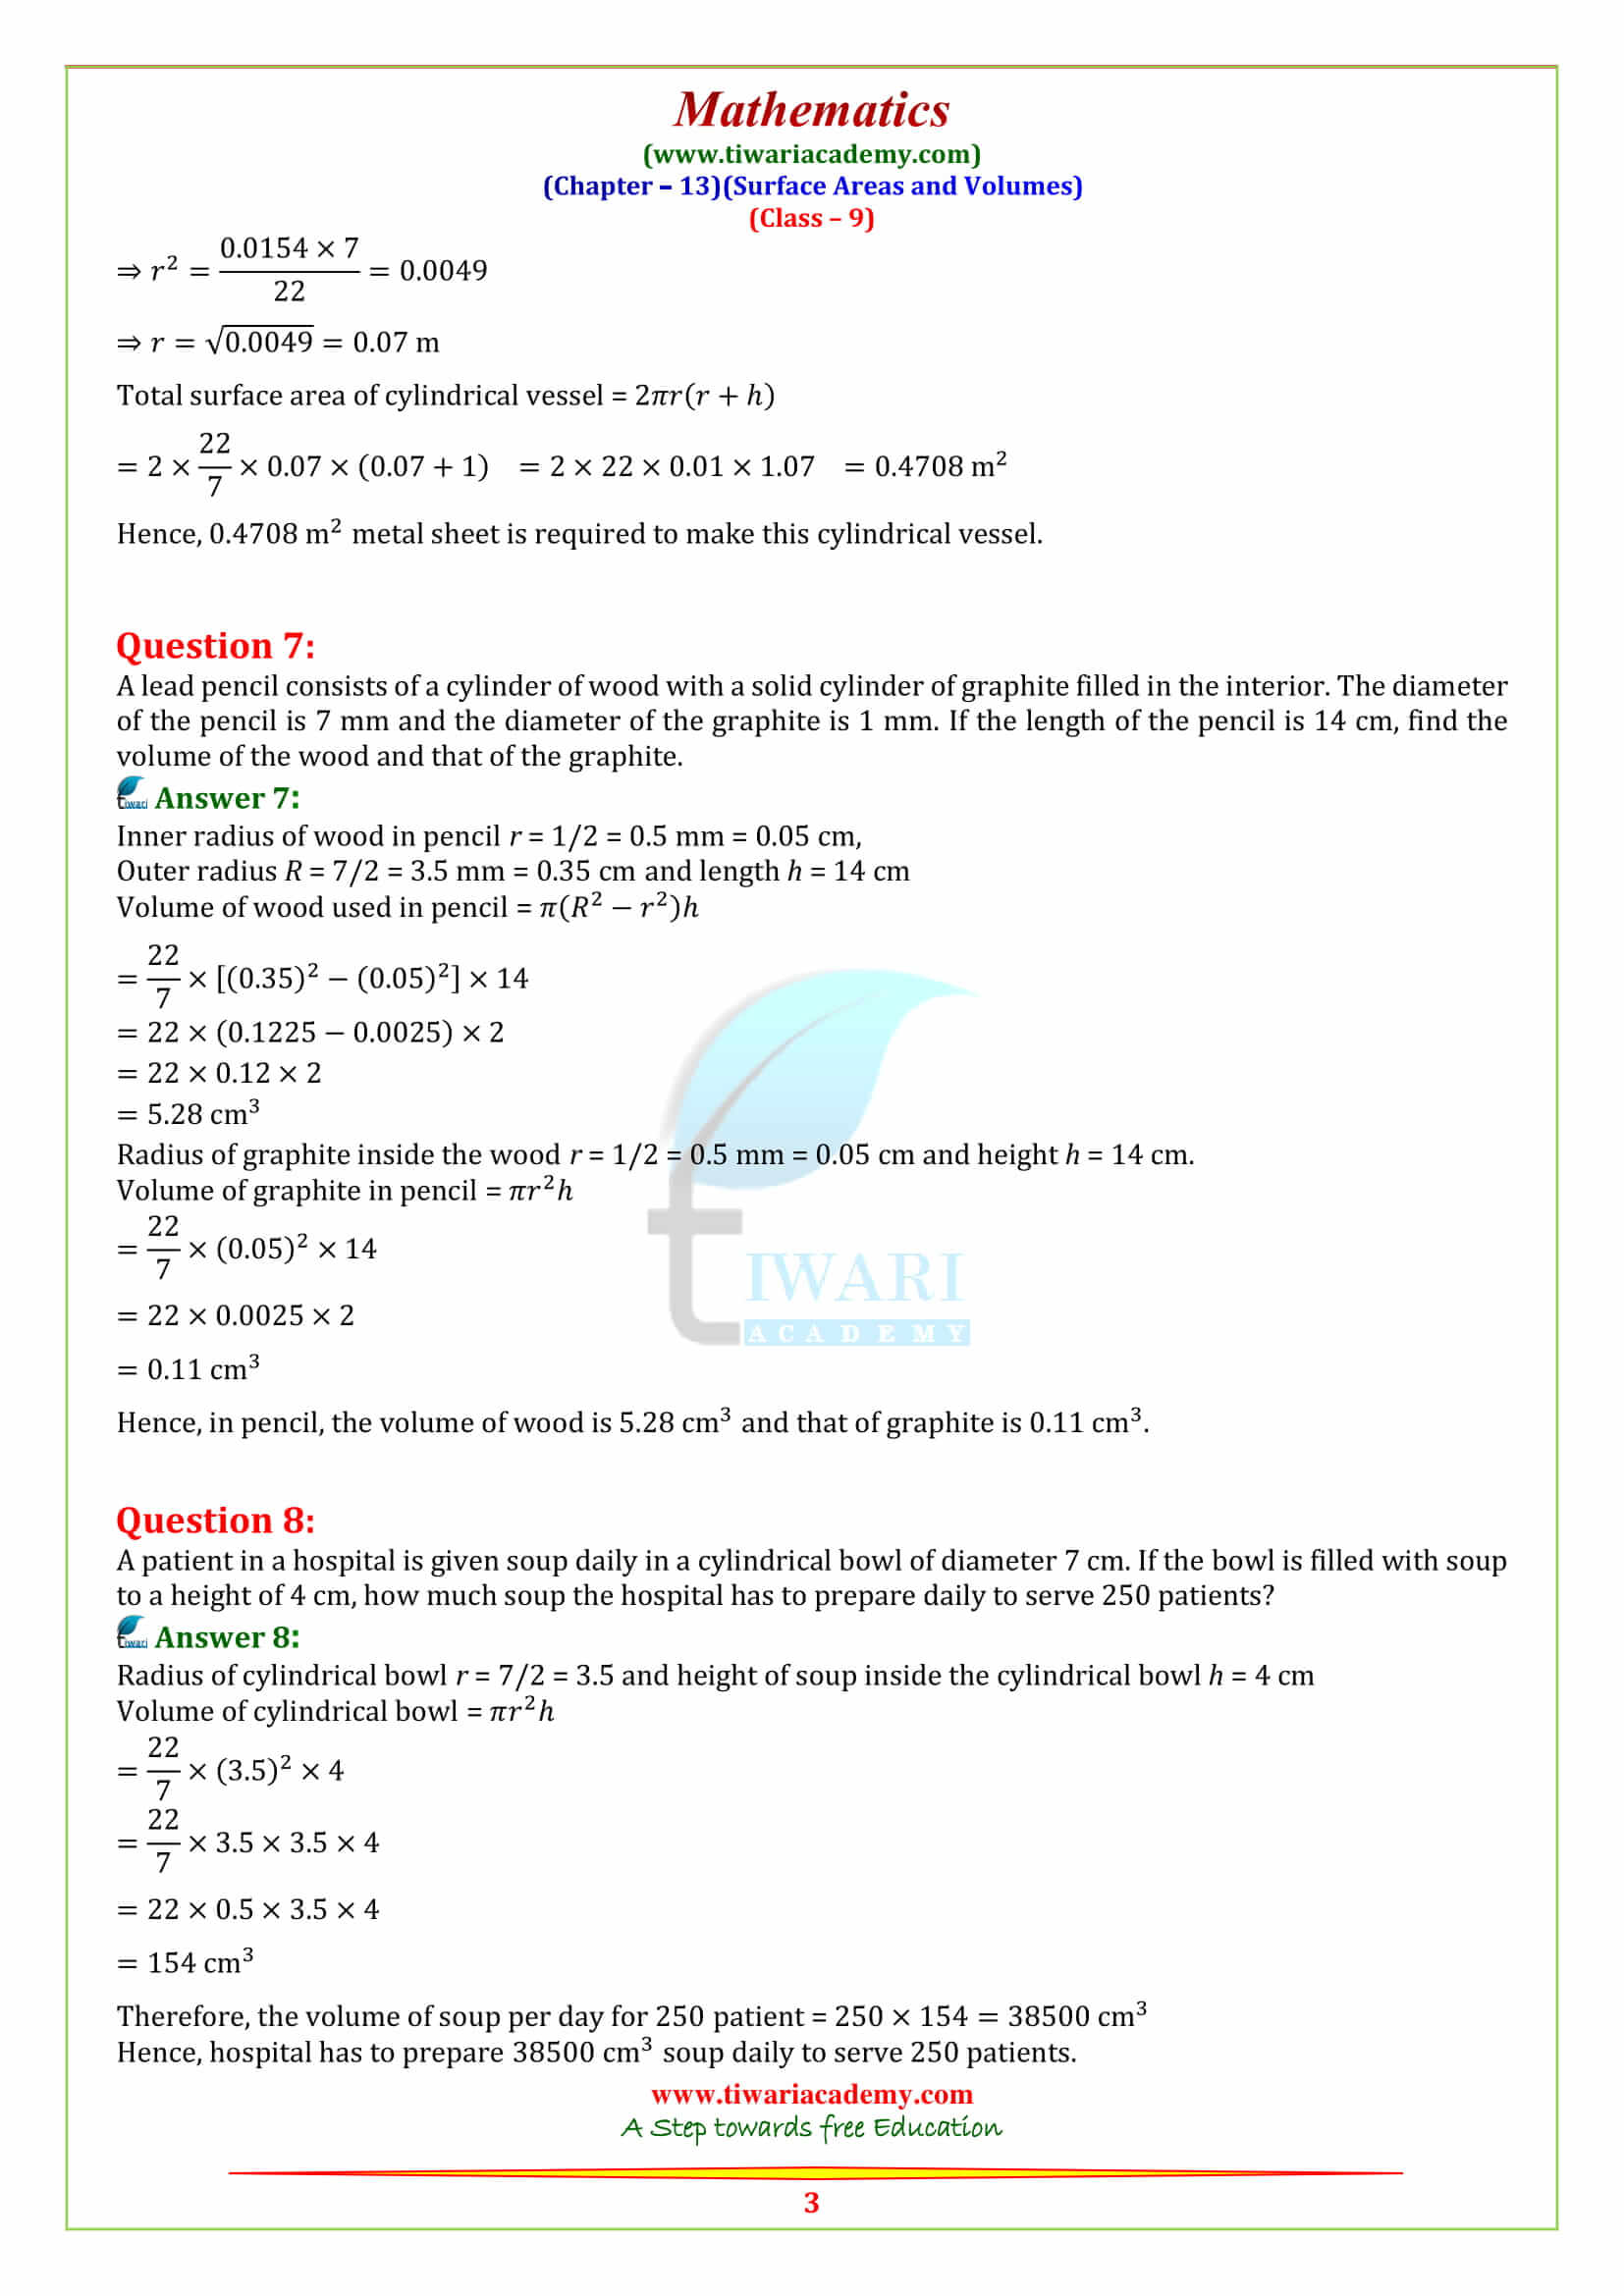 9 Maths Chapter 13 Exercise 13.6 all question answers